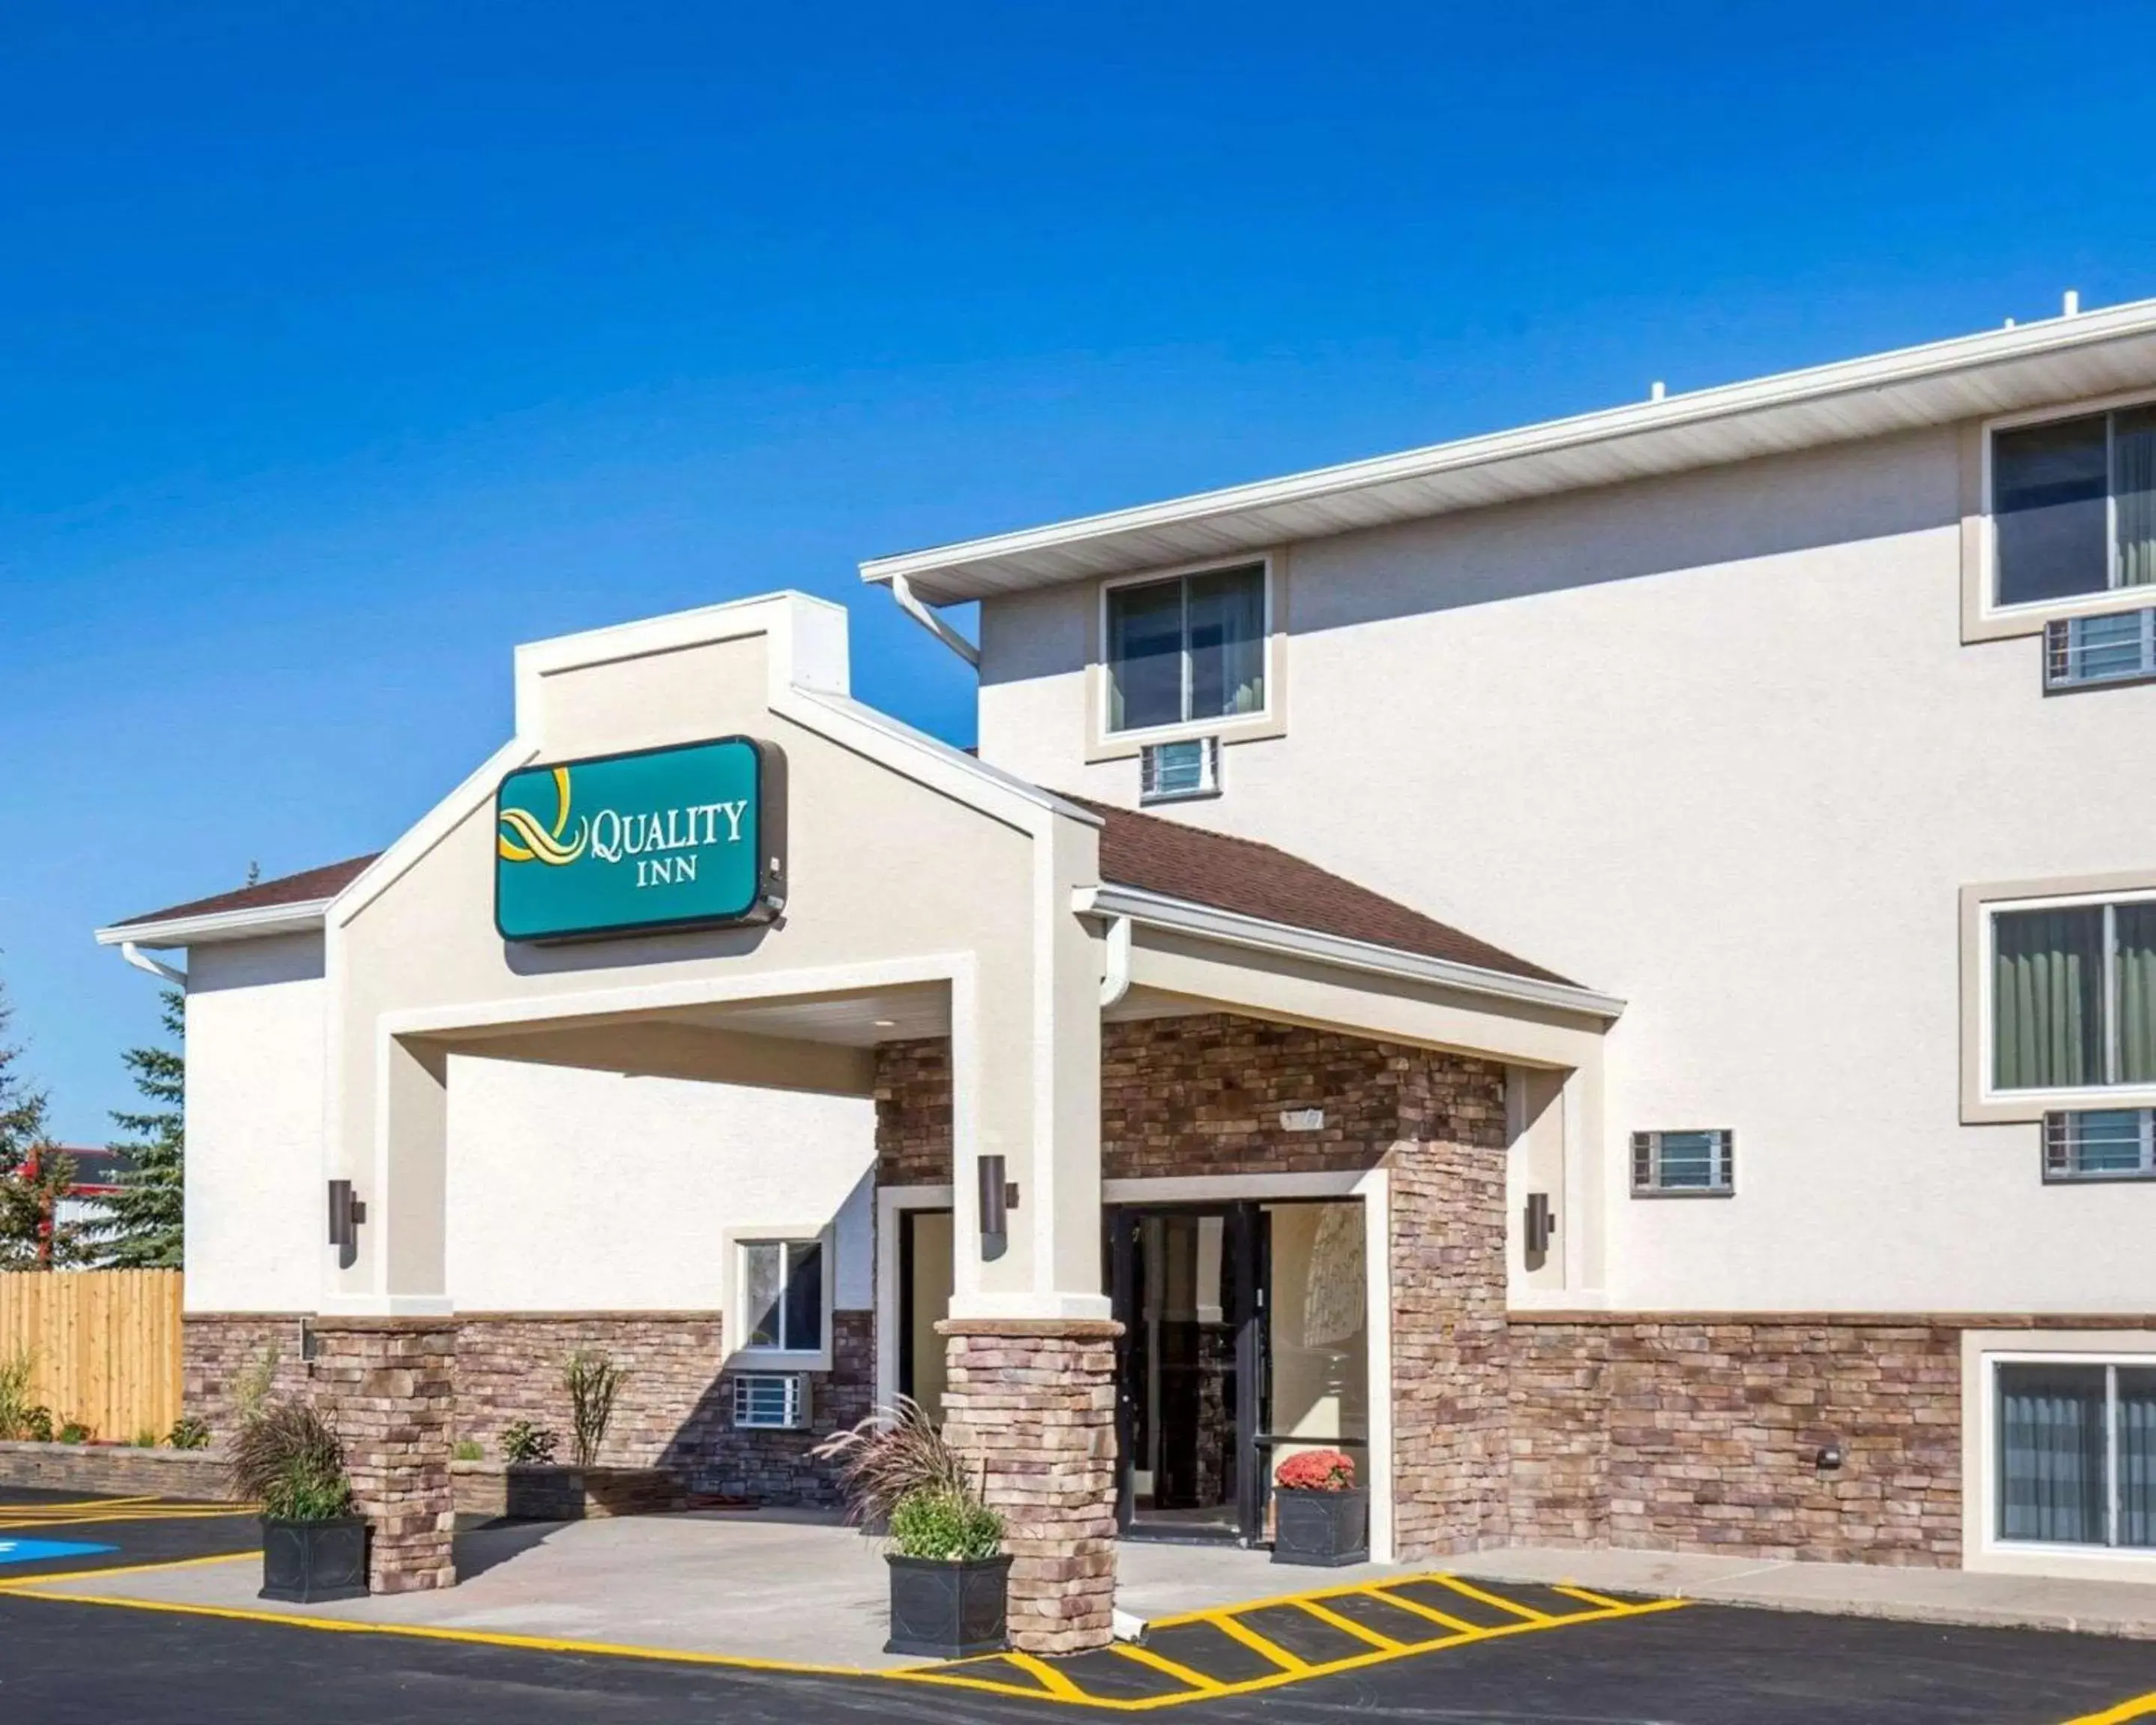 Property building in Quality Inn Gillette